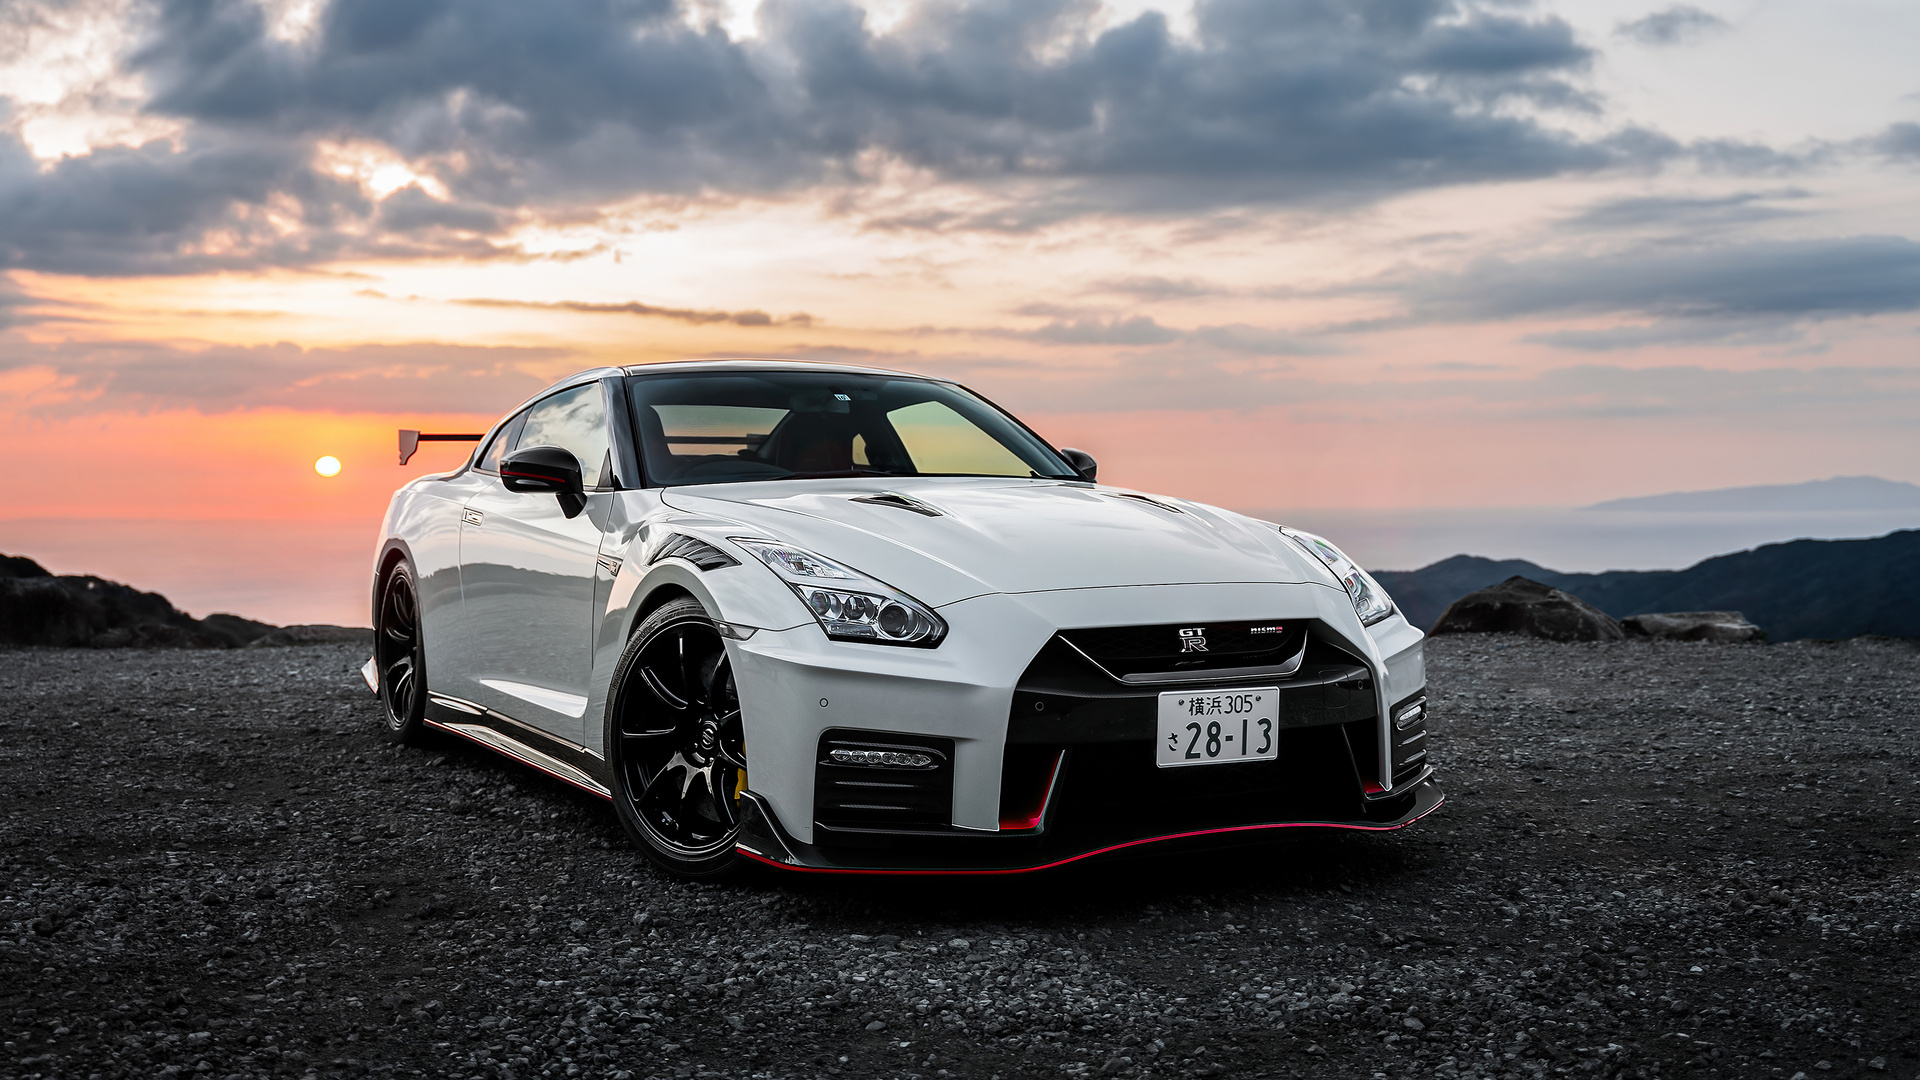 Nissan GT-R, High-performance legend, Speed meets style, Thrilling driving experience, 1920x1080 Full HD Desktop